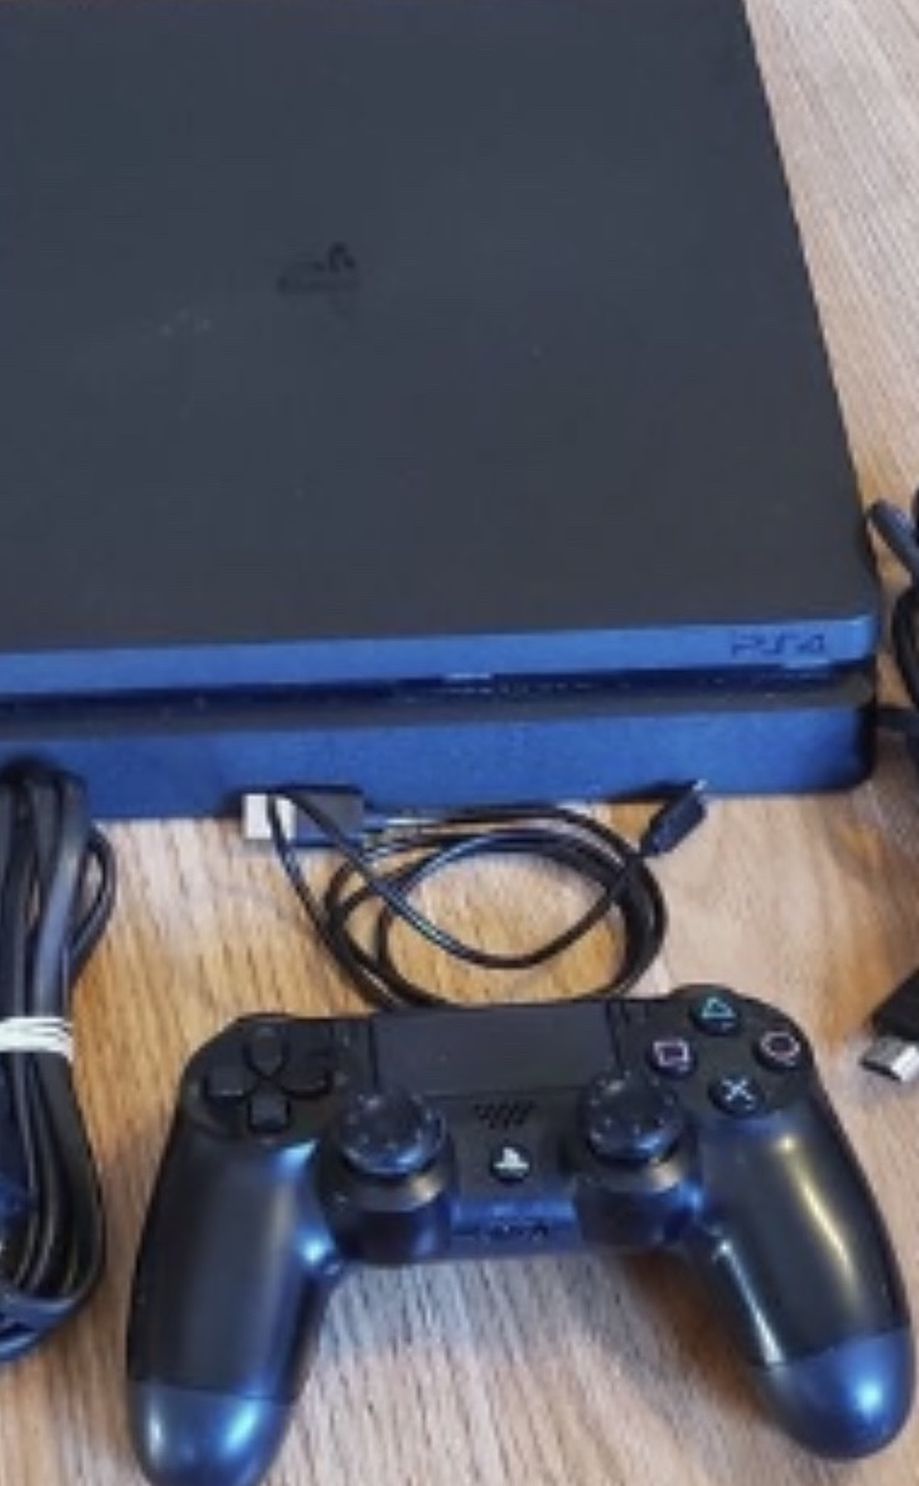 PS4 Slim 500G + Controller + Cords + A Game